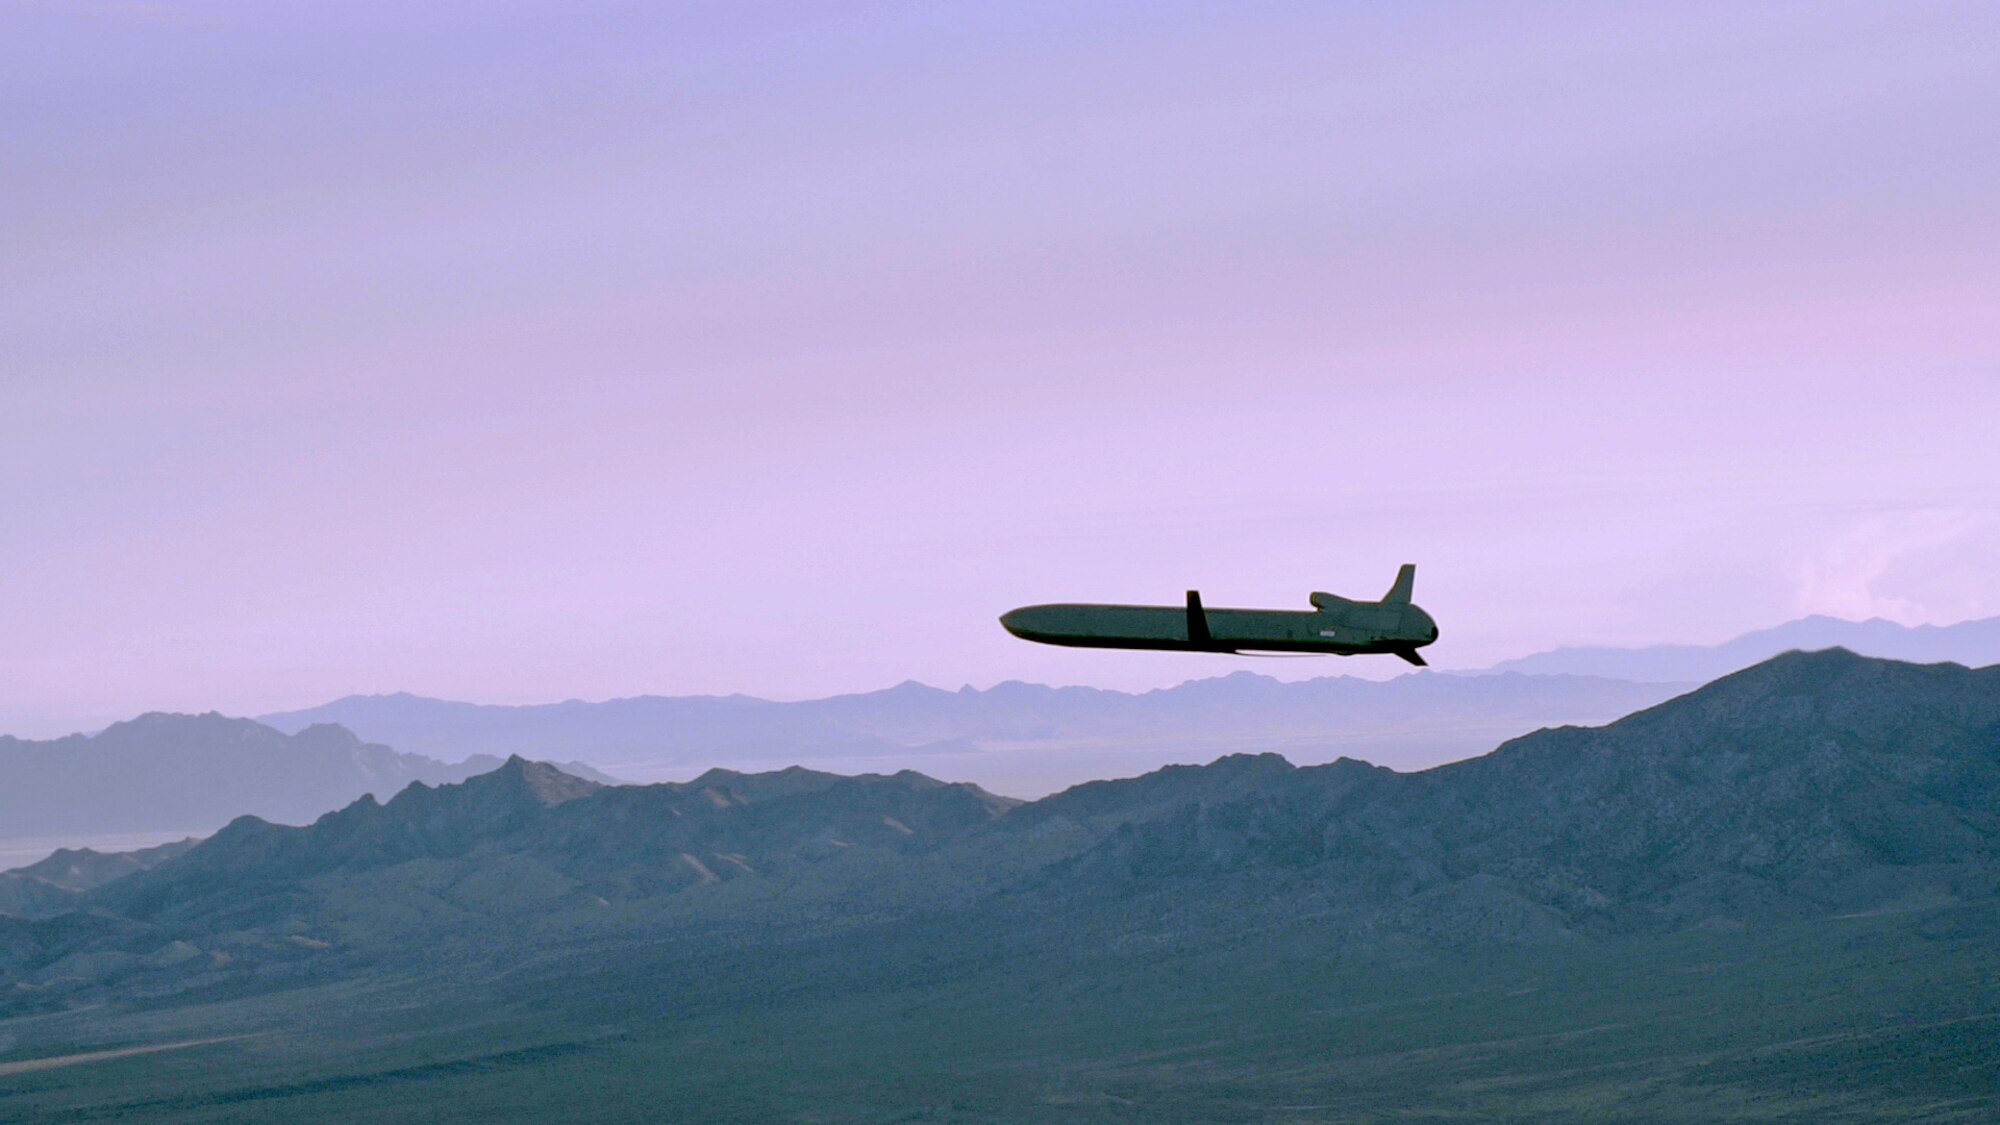 An unarmed AGM-86B Air-Launched Cruise Missile maneuvers over the Utah Test and Training Range en route to its final target Sept. 22, 2014, during a Nuclear Weapons System Evaluation Program simulated combat mission. The ALCM, released from a B-52H Stratofortress flown by the 2nd Bomb Wing, Barksdale Air Force Base, La., was part of an end-to-end operational evaluation of 8th Air Force and Task Force 204’s ability to deliver the weapon from storage to its final target. (U.S. Air Force photo/Staff Sgt. Roidan Carlson)